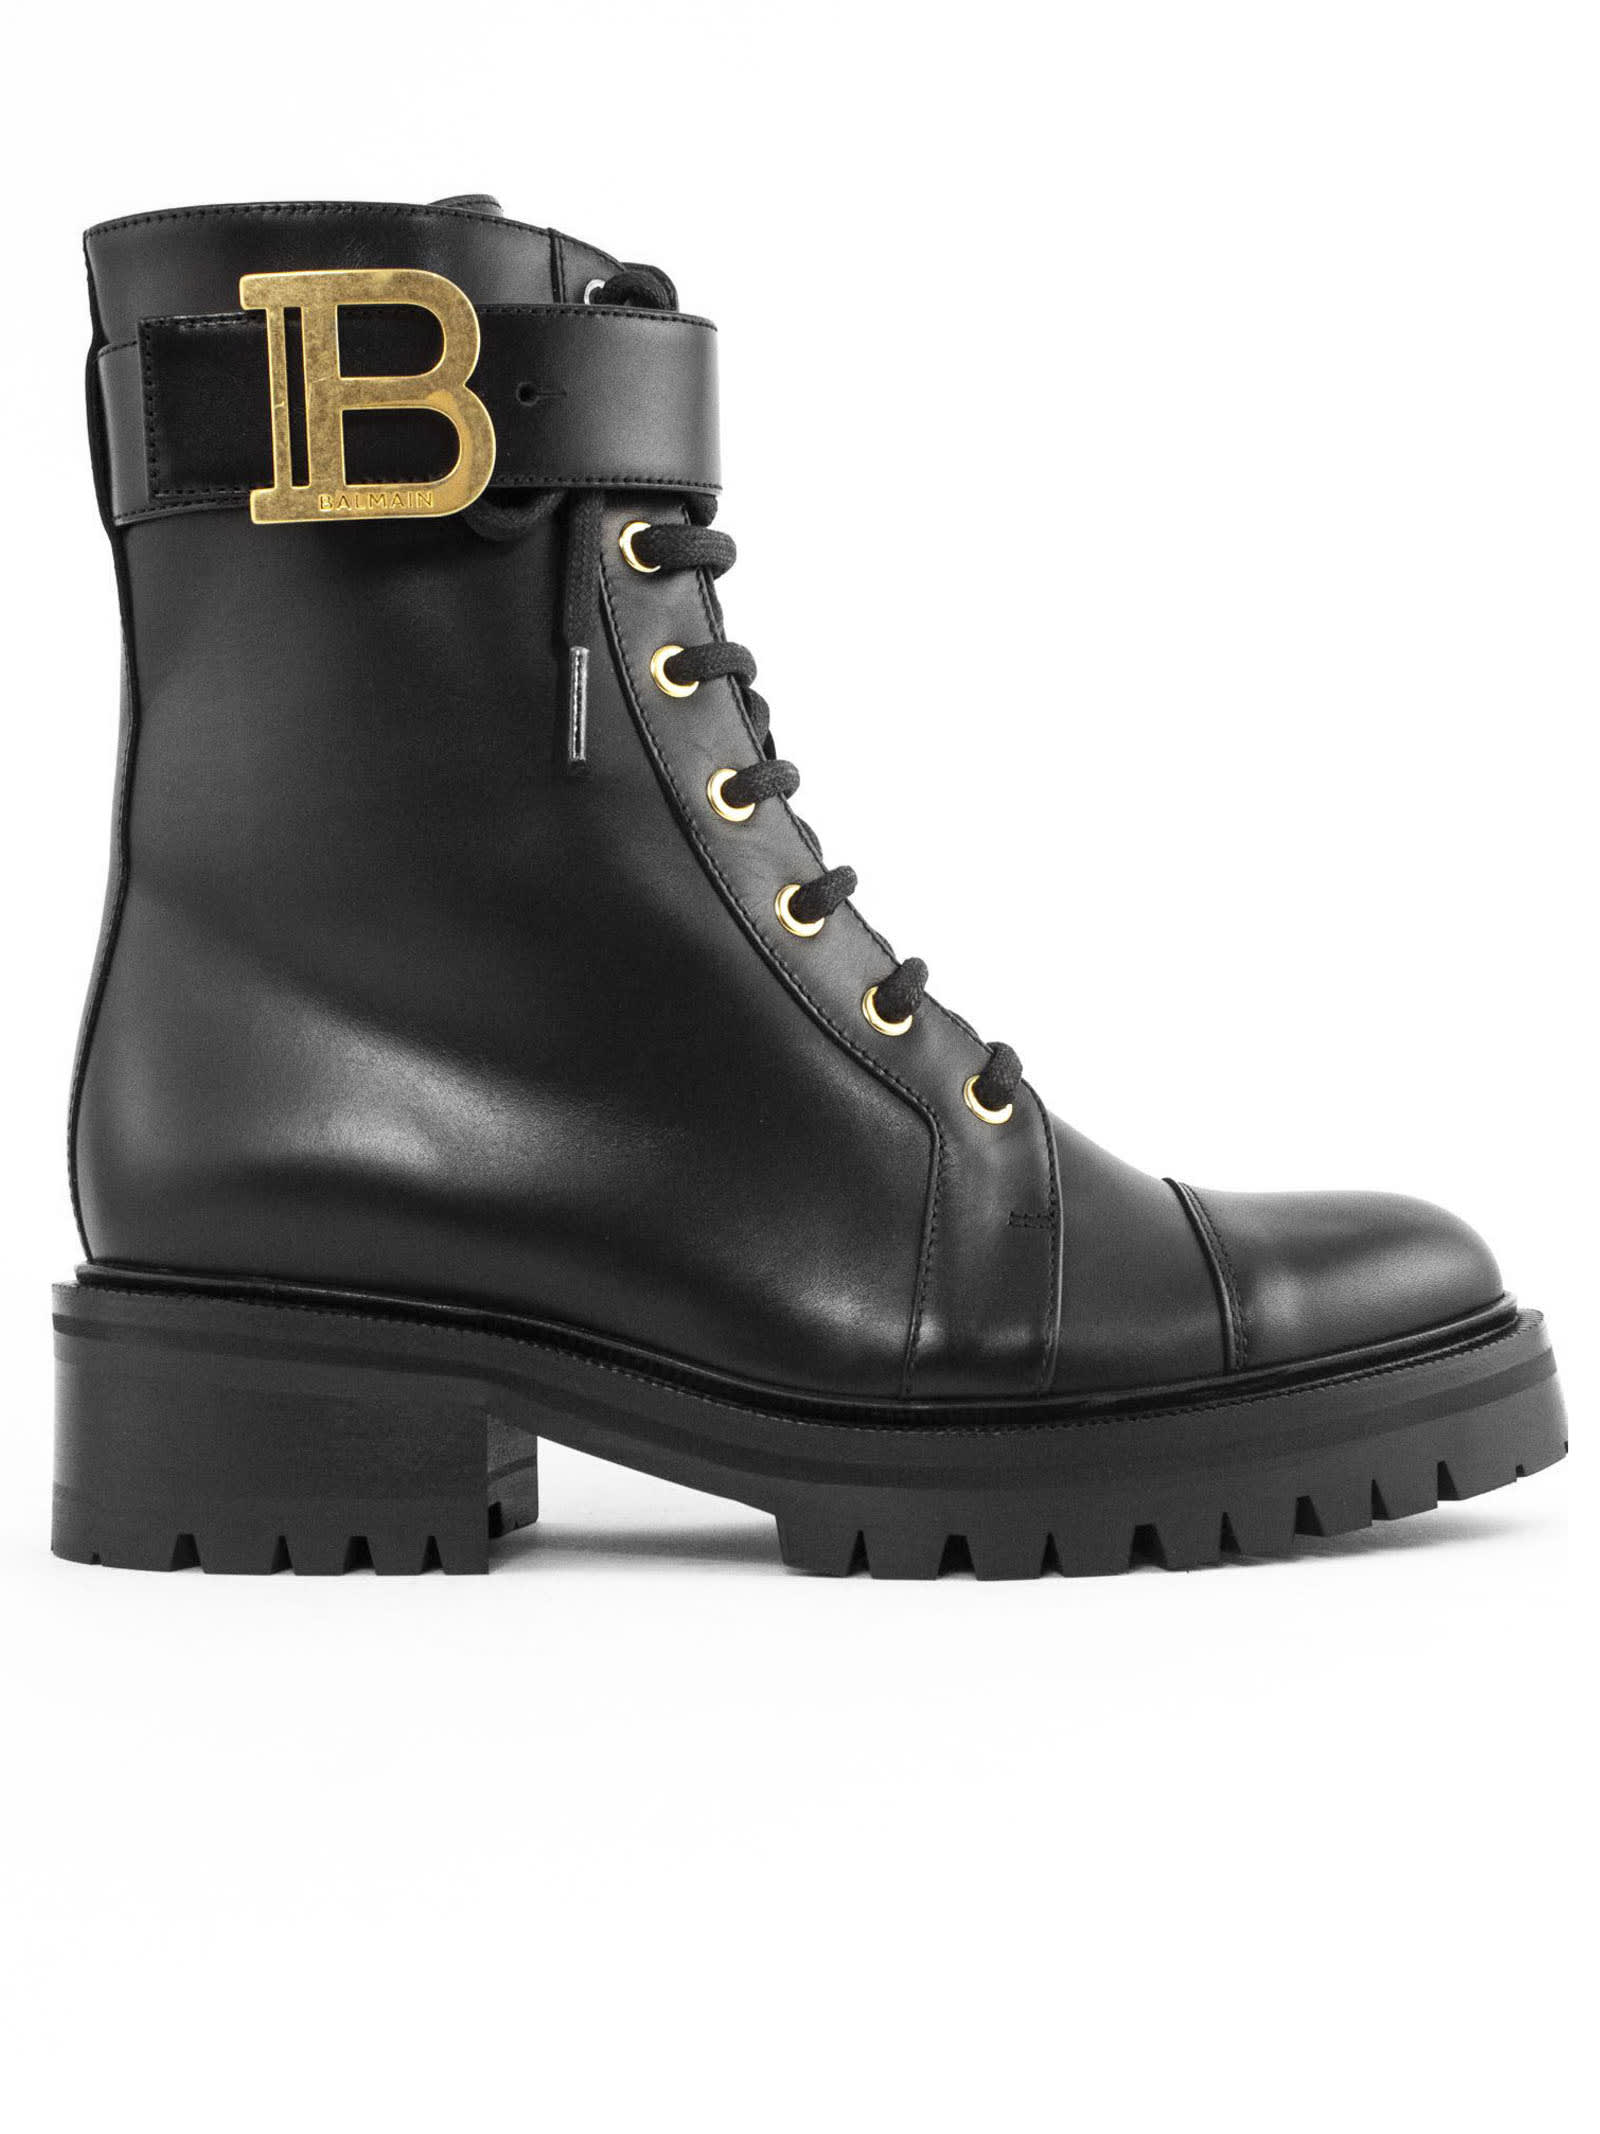 Buy Balmain Black Leather Ranger Ankle Boots online, shop Balmain shoes with free shipping